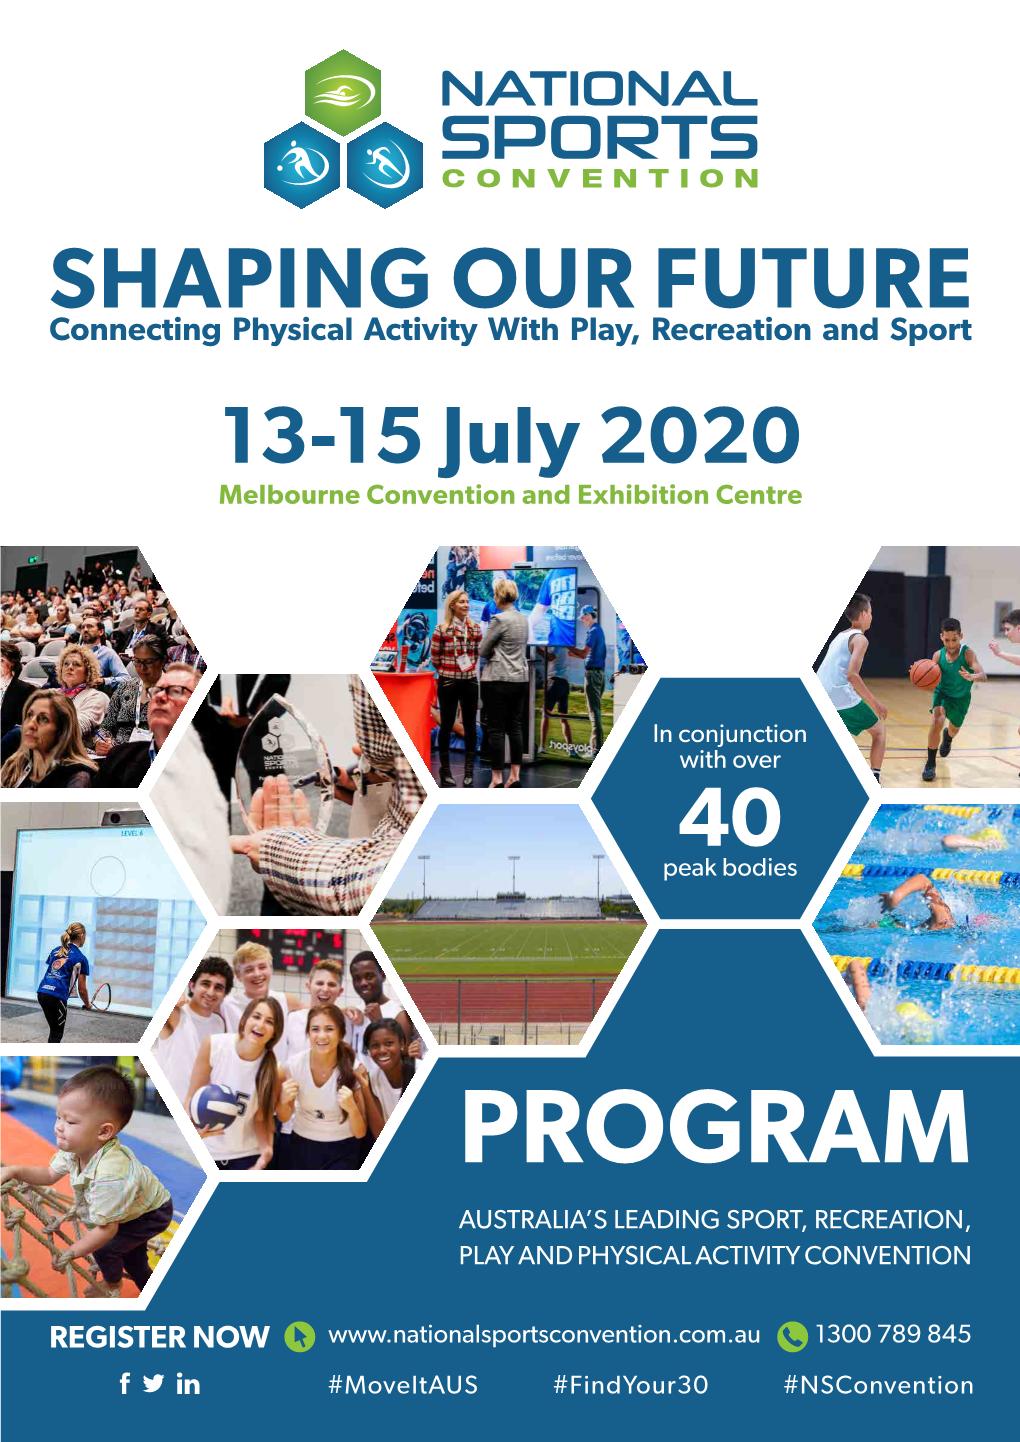 Program Australia’S Leading Sport, Recreation, Play and Physical Activity Convention